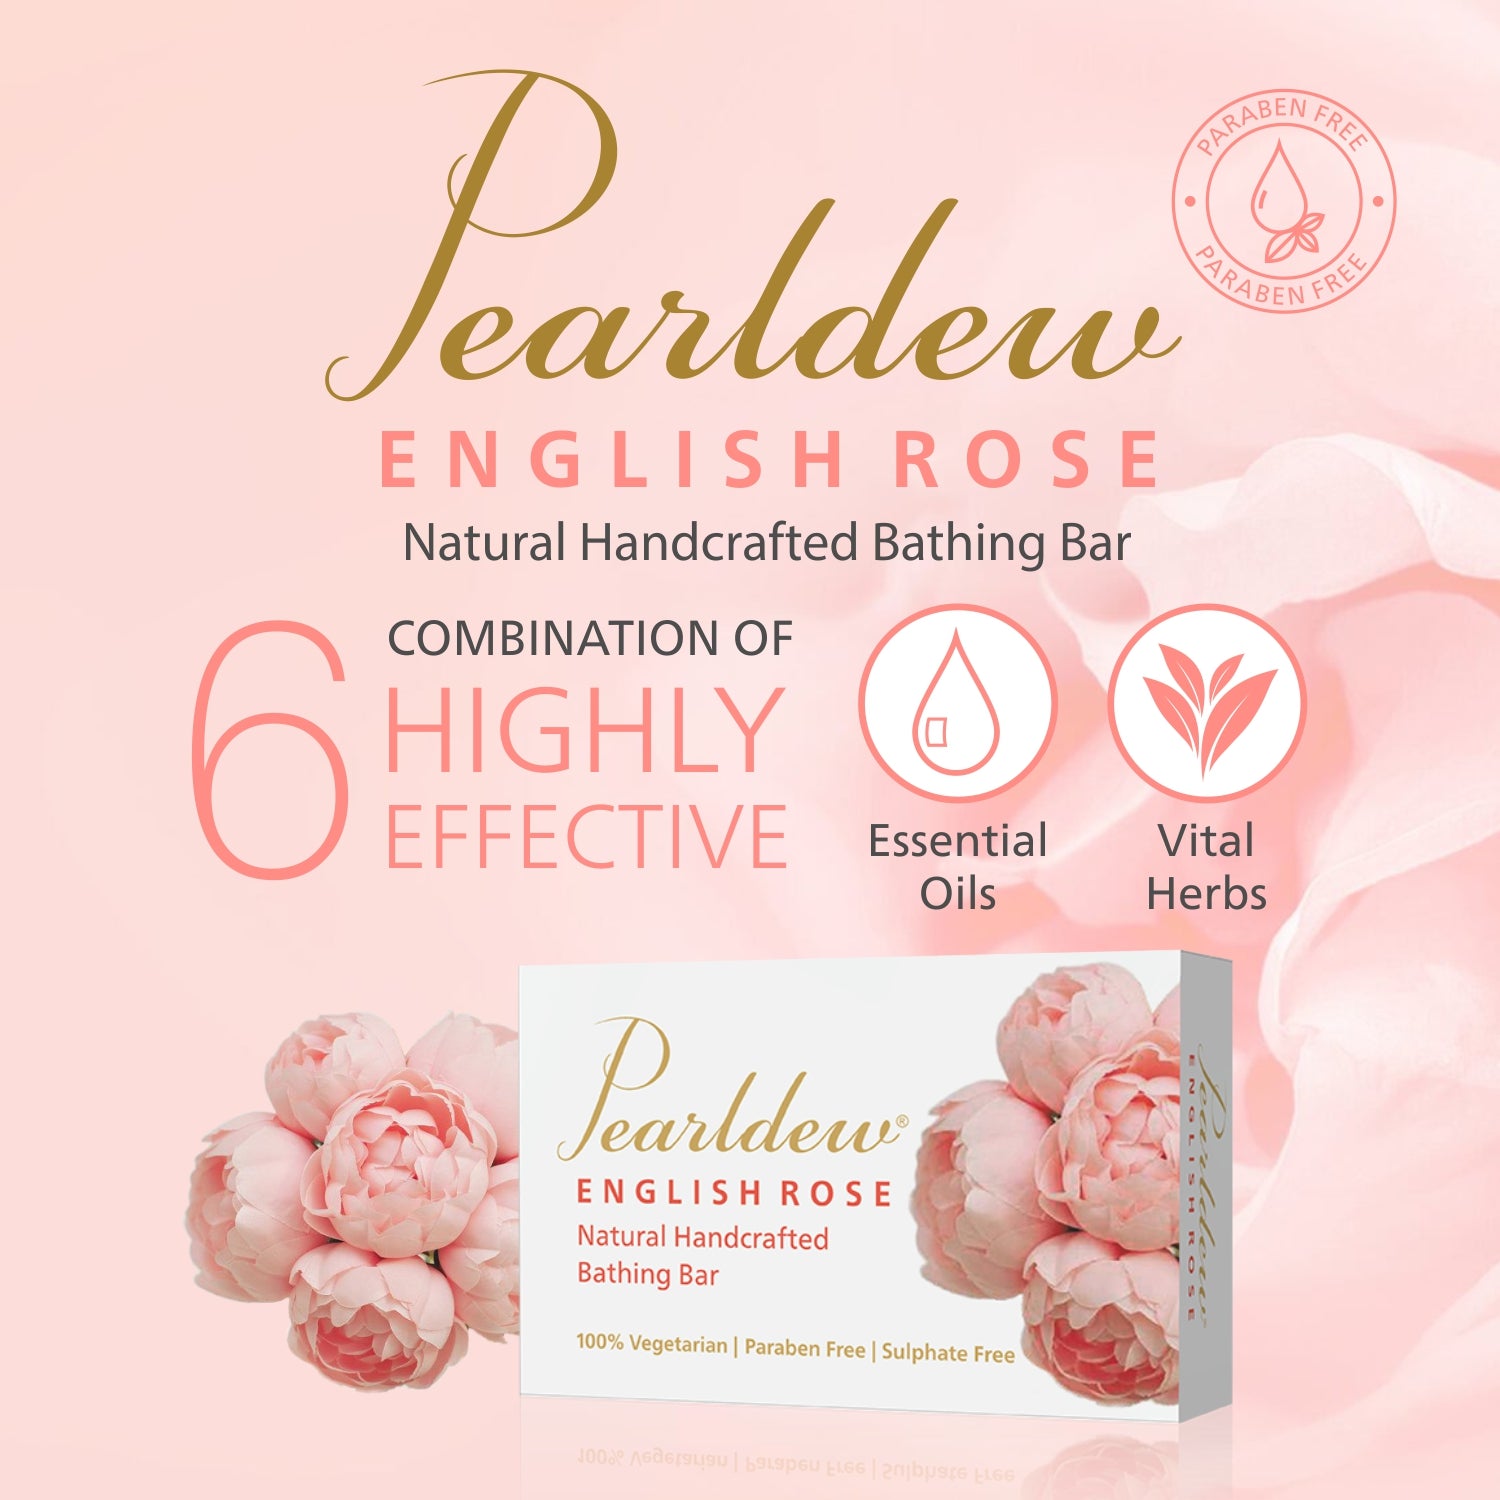 Pearldew English Rose Natural Handcrafted Bathing Bar (75 gm)